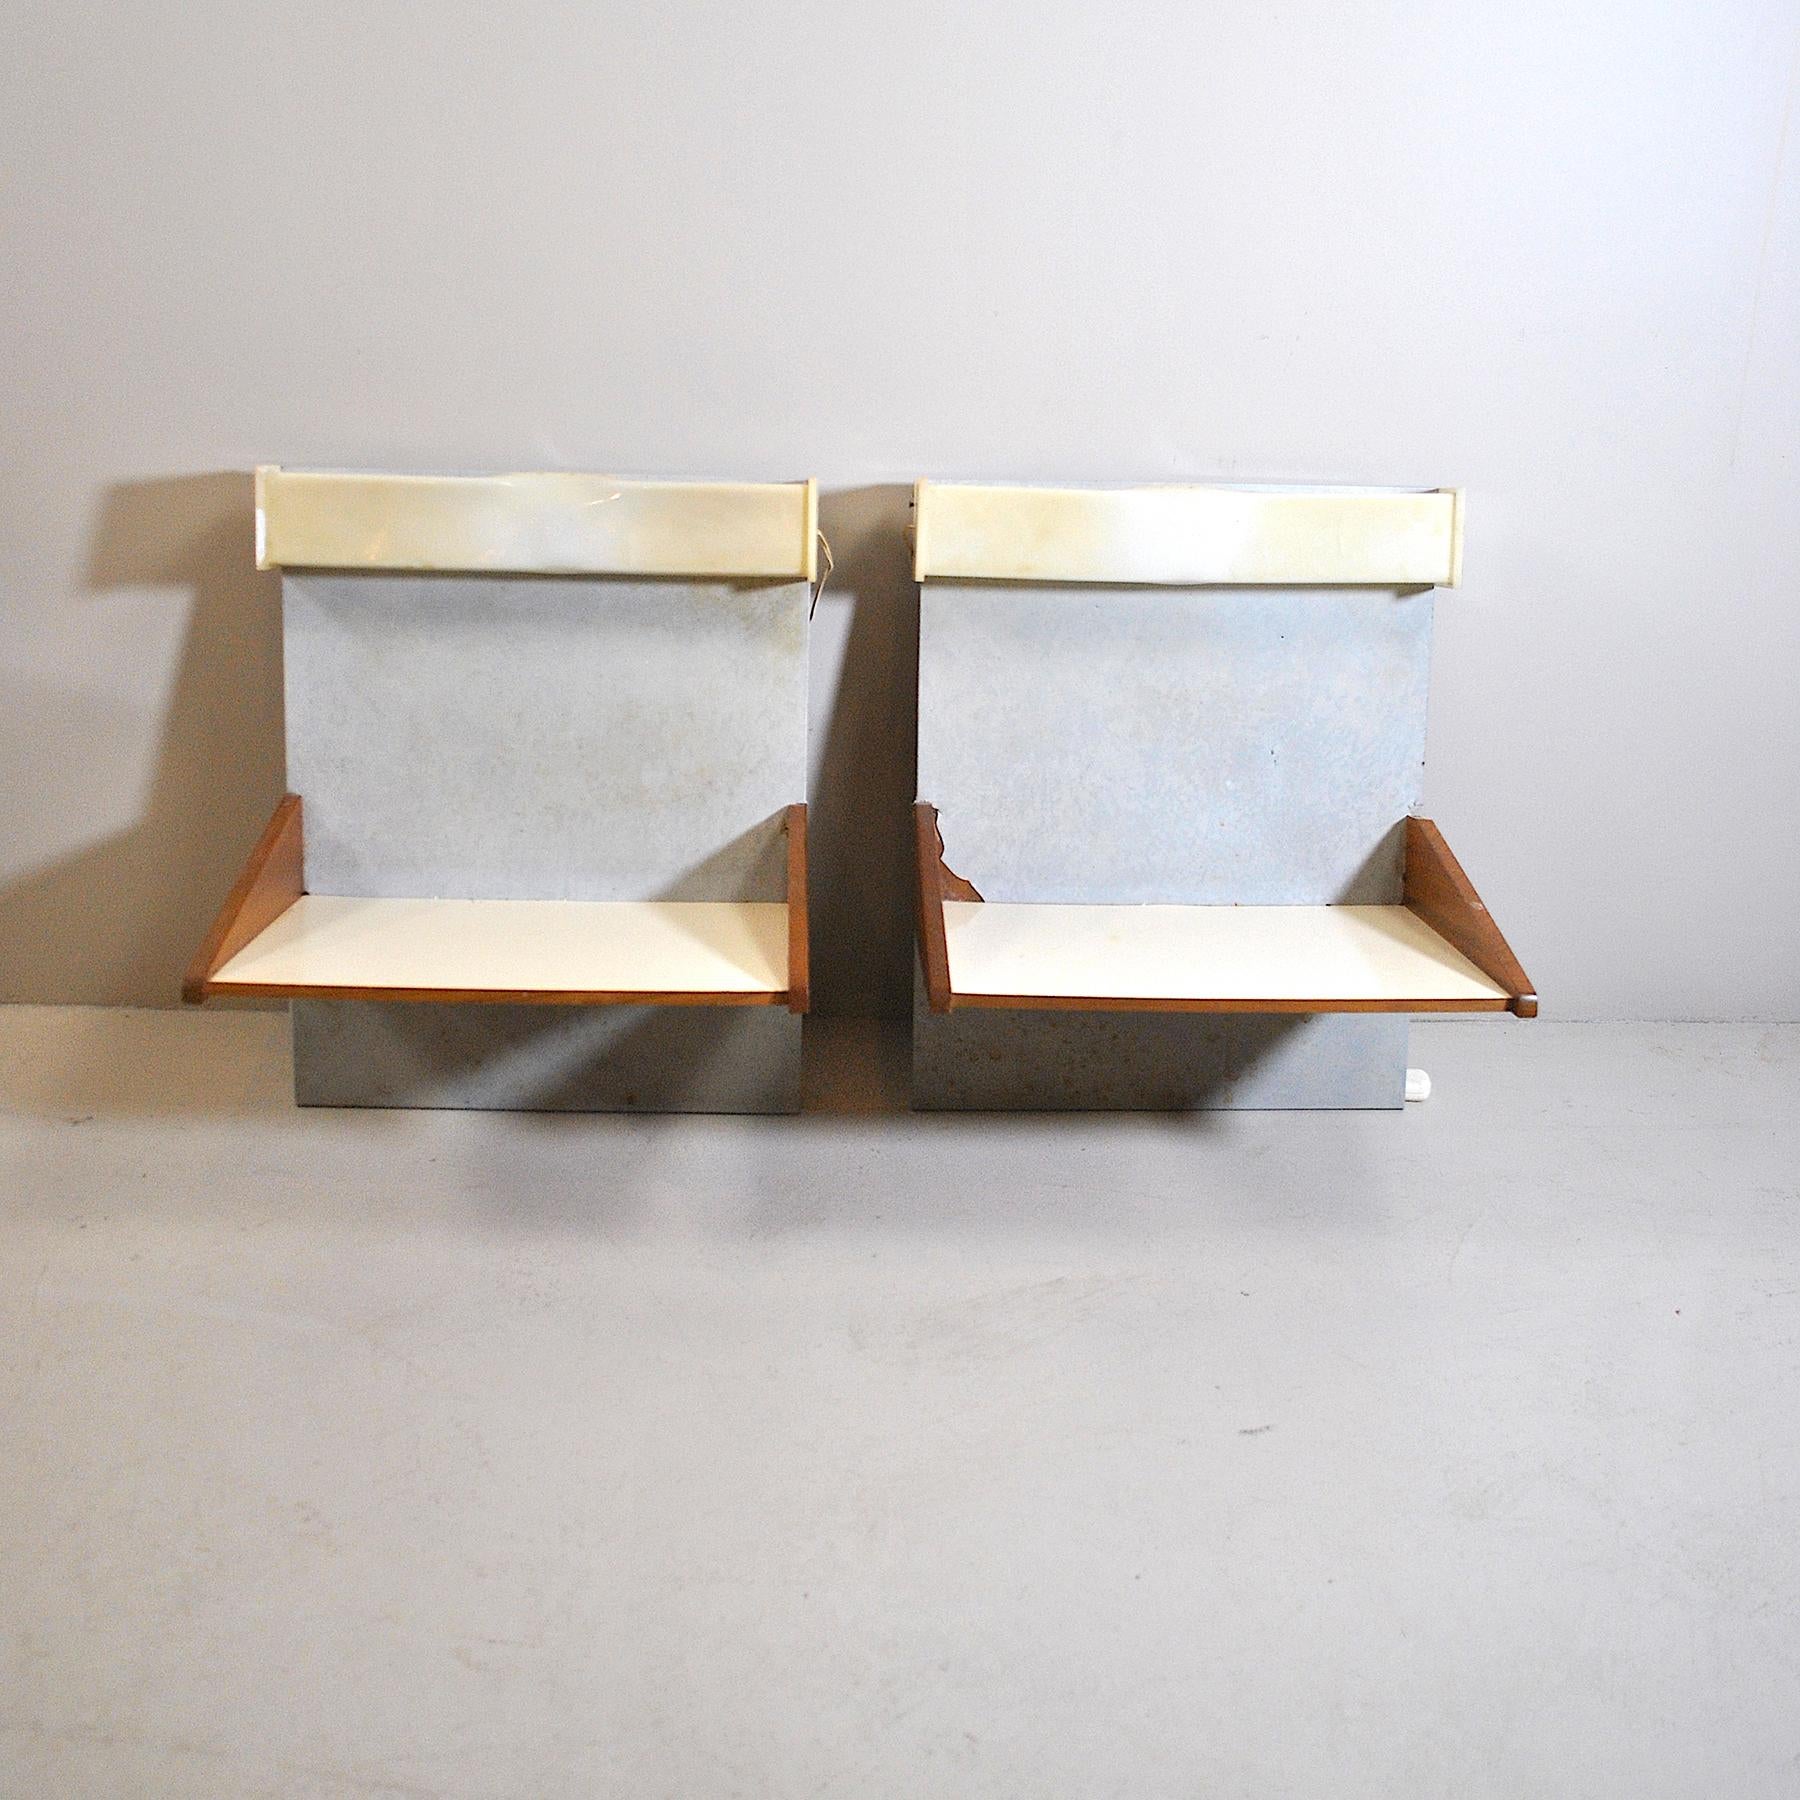 Pair of wall-mounted wooden bedside tables with lights incorporated in a plexiglass structure.